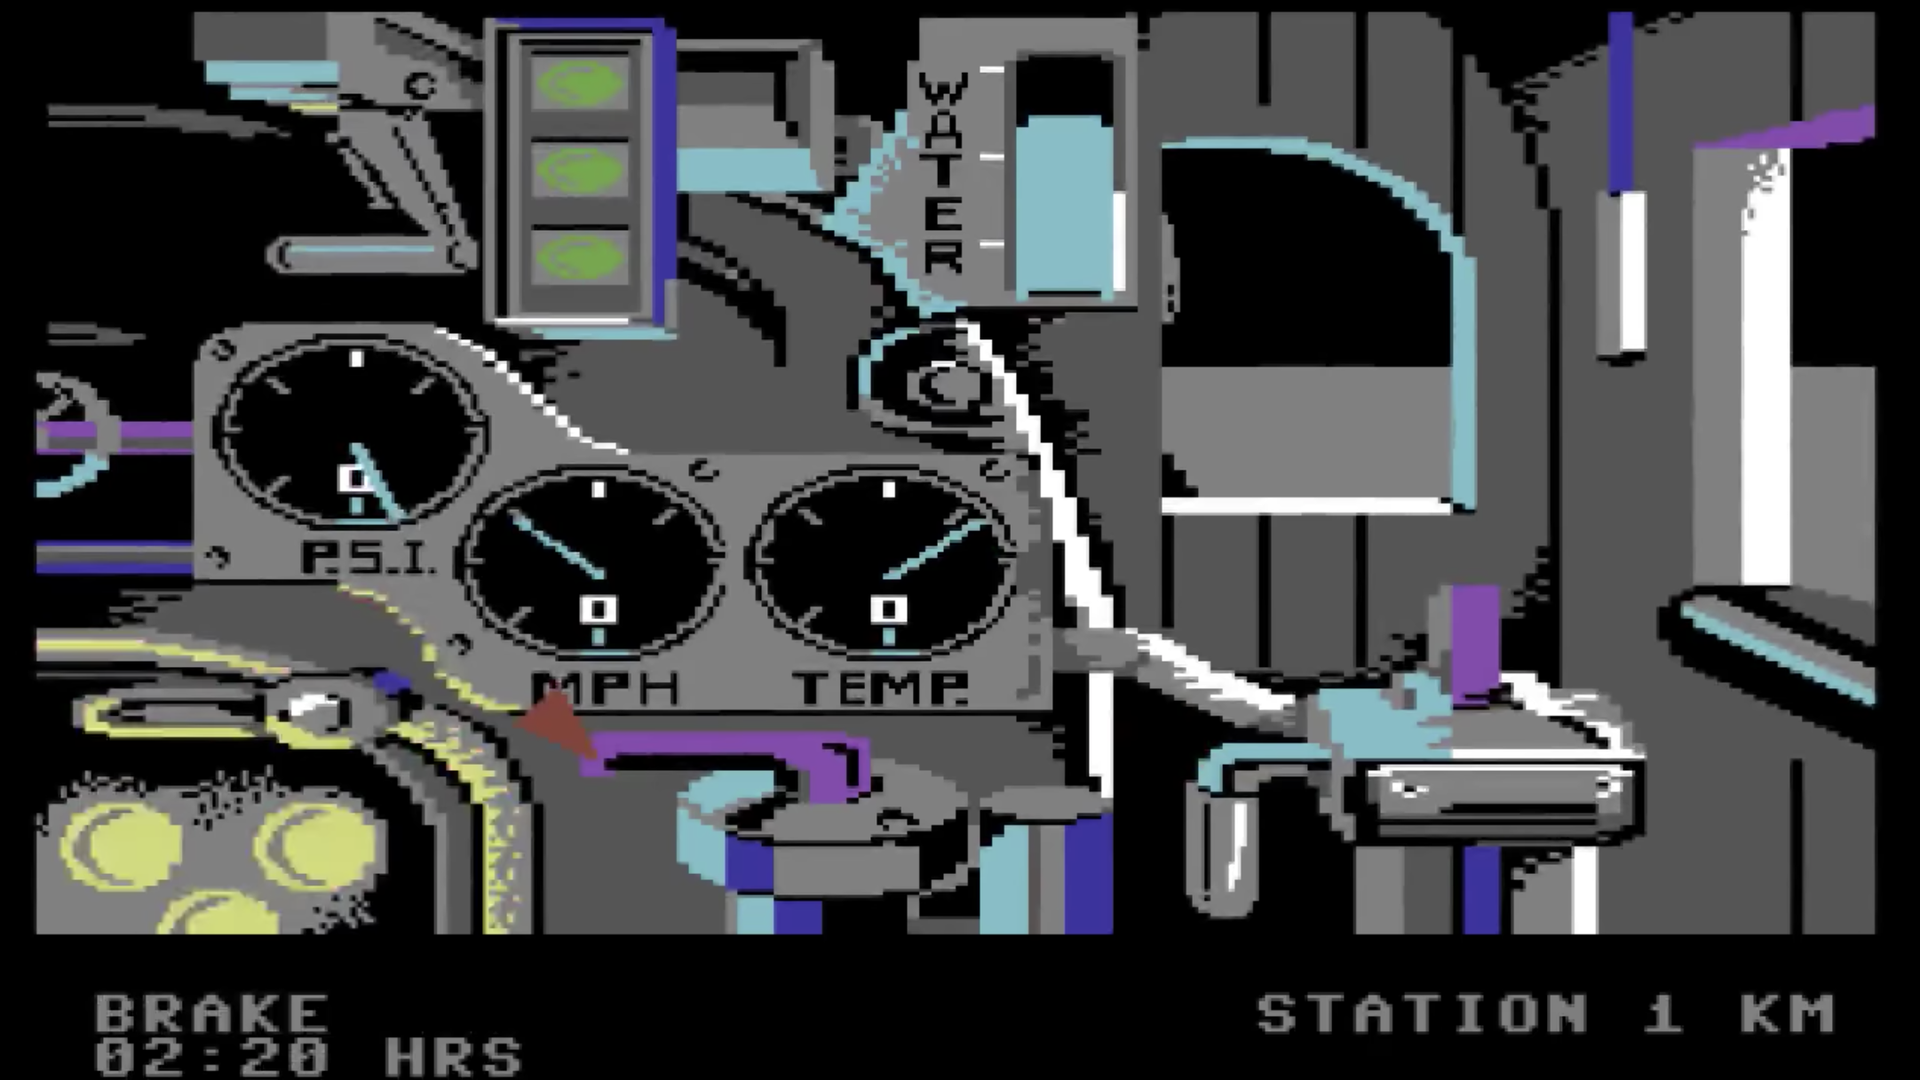 Screenshot of an old computer game showing the inside of a train